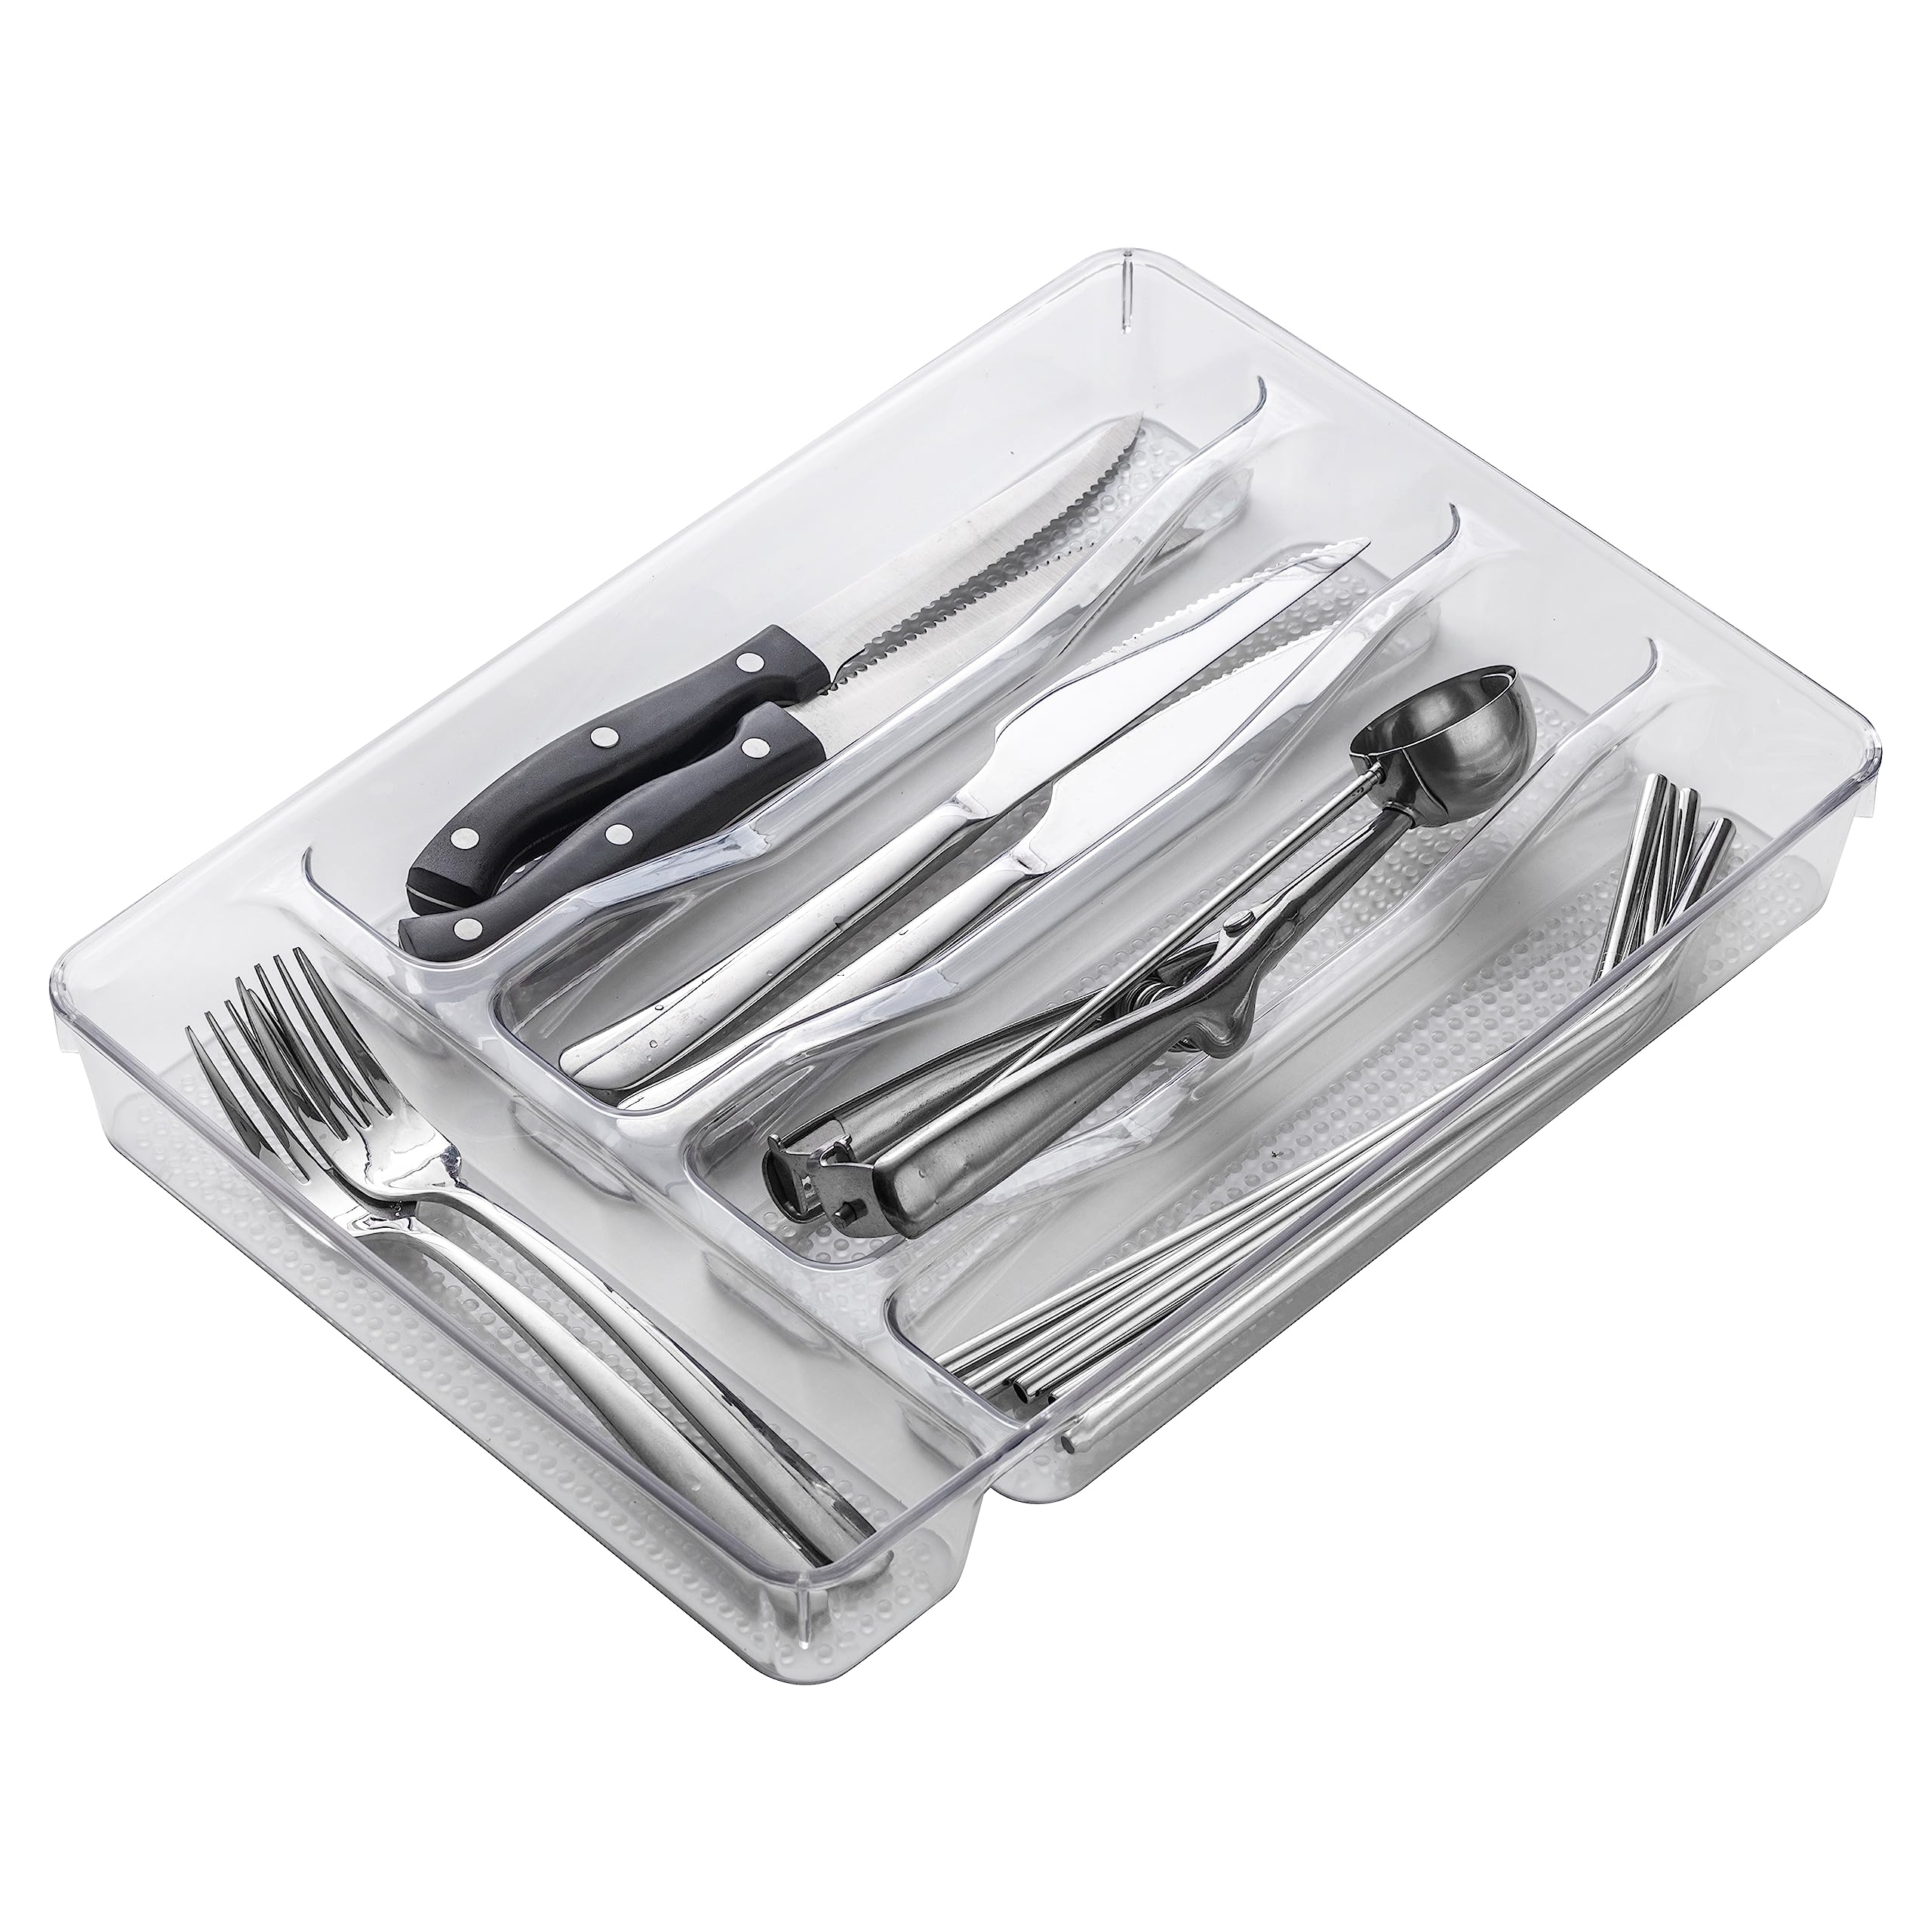 SIMPLEMADE Large Silverware Tray Organizer, 5-Compartments, Non-Slip Lining for Kitchen Drawer Flatware (Clear)  - Like New